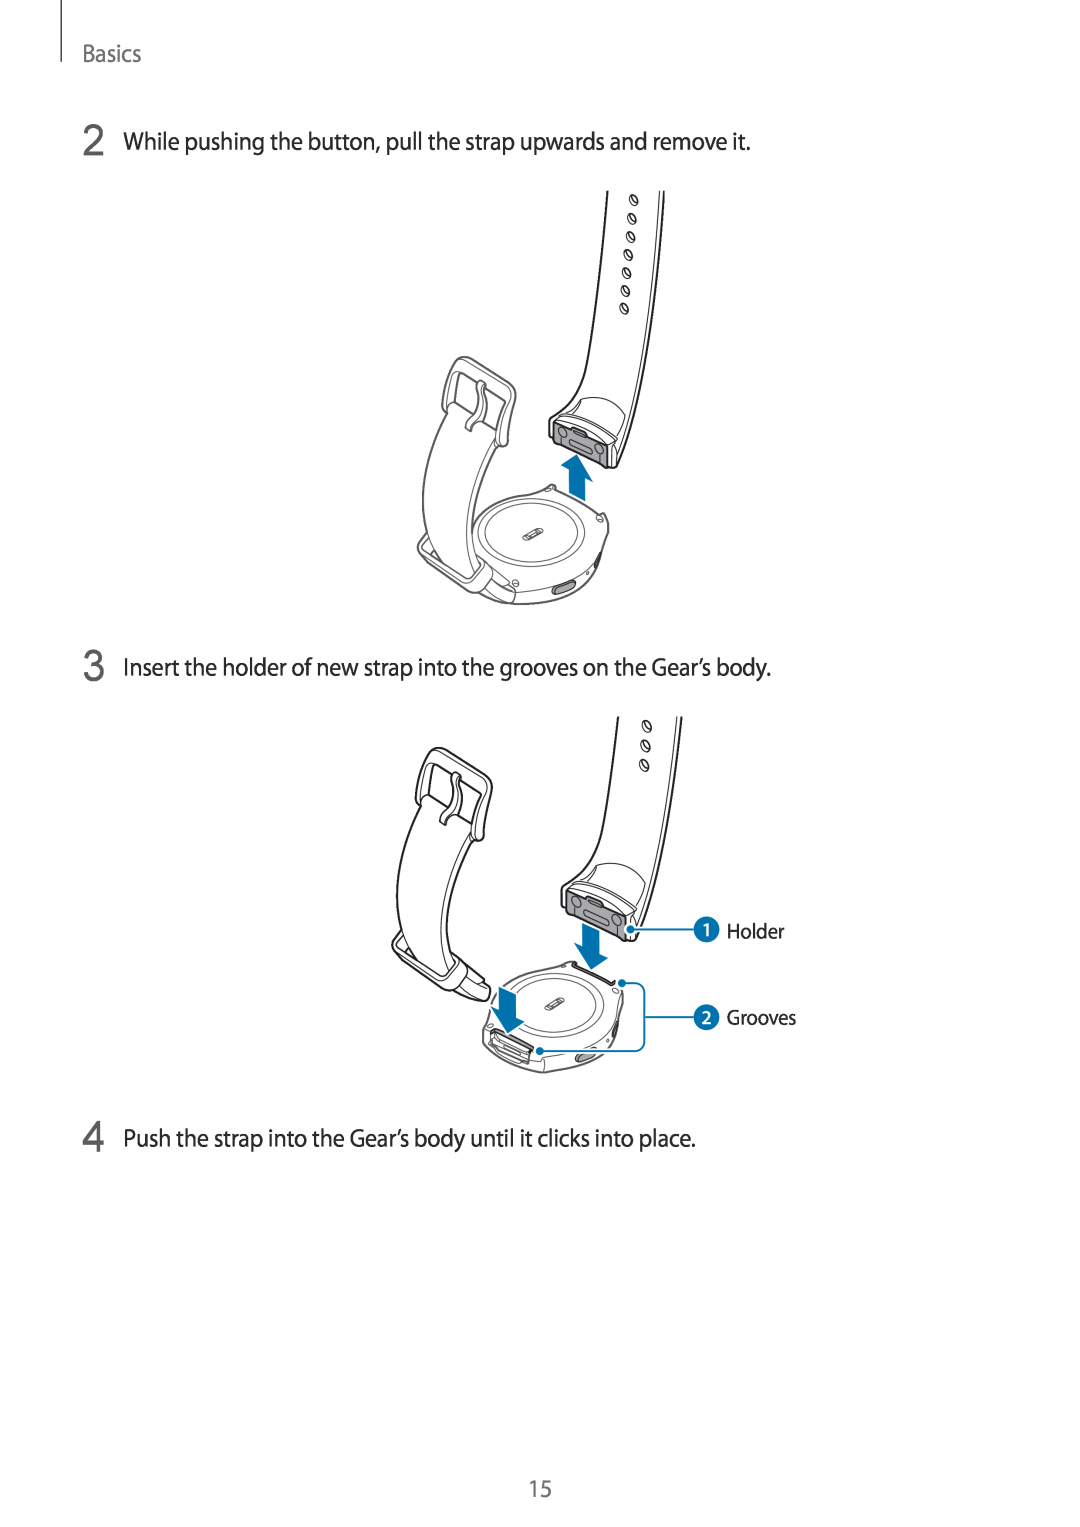 Samsung SM-R7320ZKAITV manual Basics, While pushing the button, pull the strap upwards and remove it, Holder 2 Grooves 